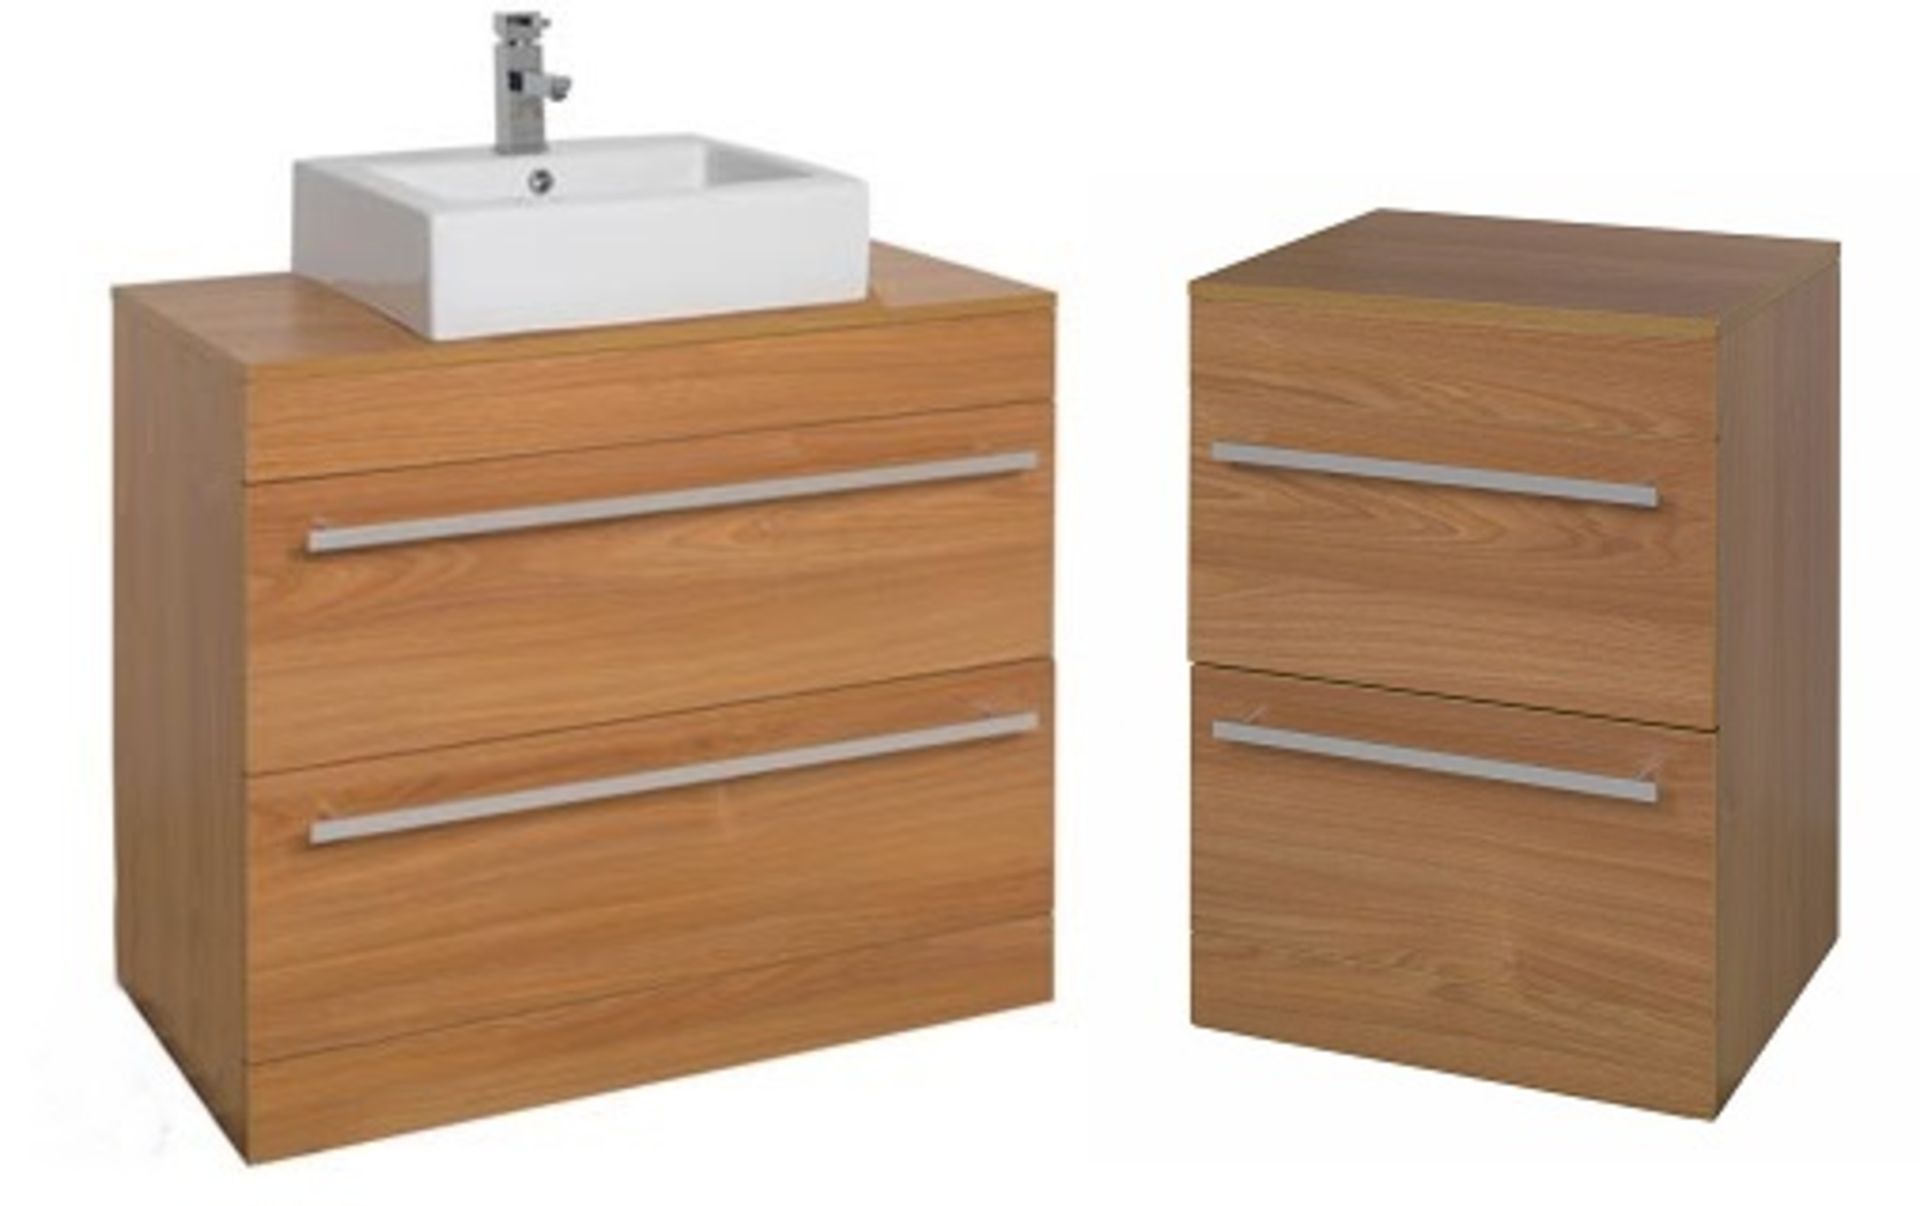 1 x Odessa Bathroom Cabinet Set Including 600mm Vanity Drawer Cabinet and 600mm Storage Cabinet With